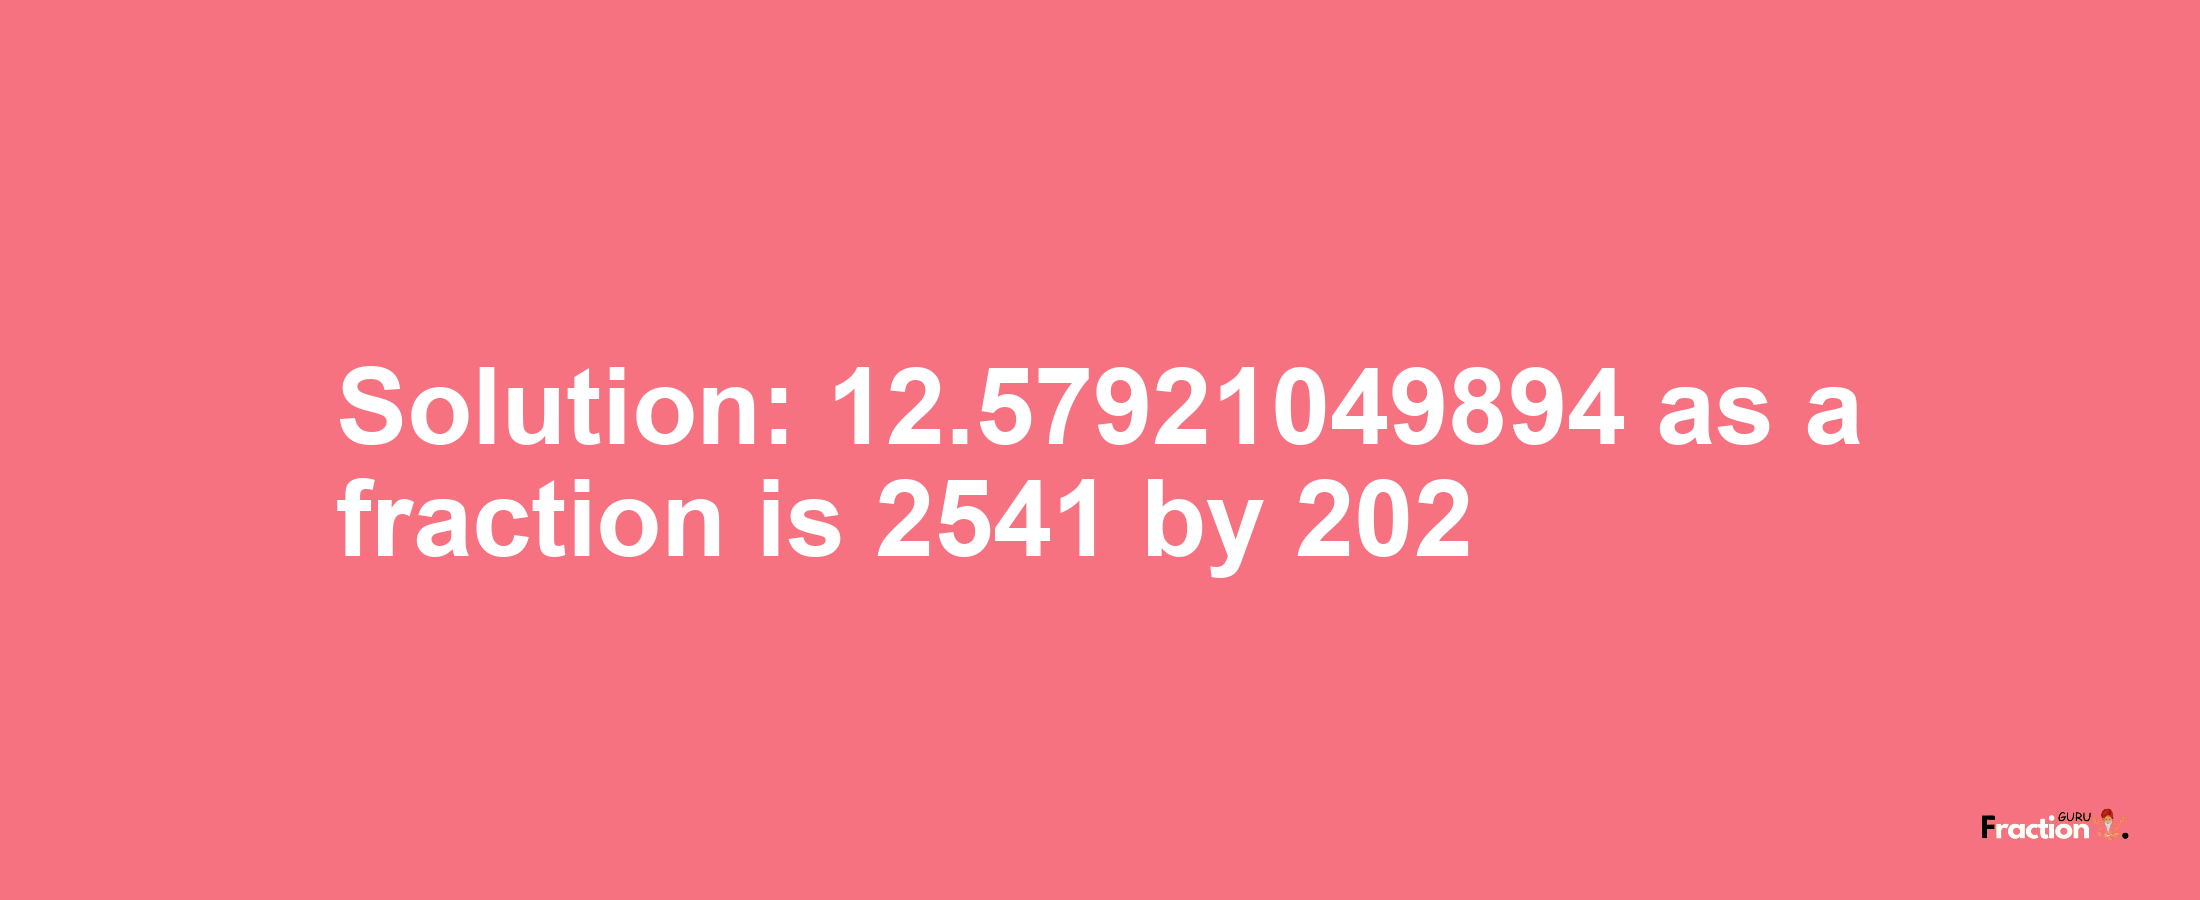 Solution:12.57921049894 as a fraction is 2541/202